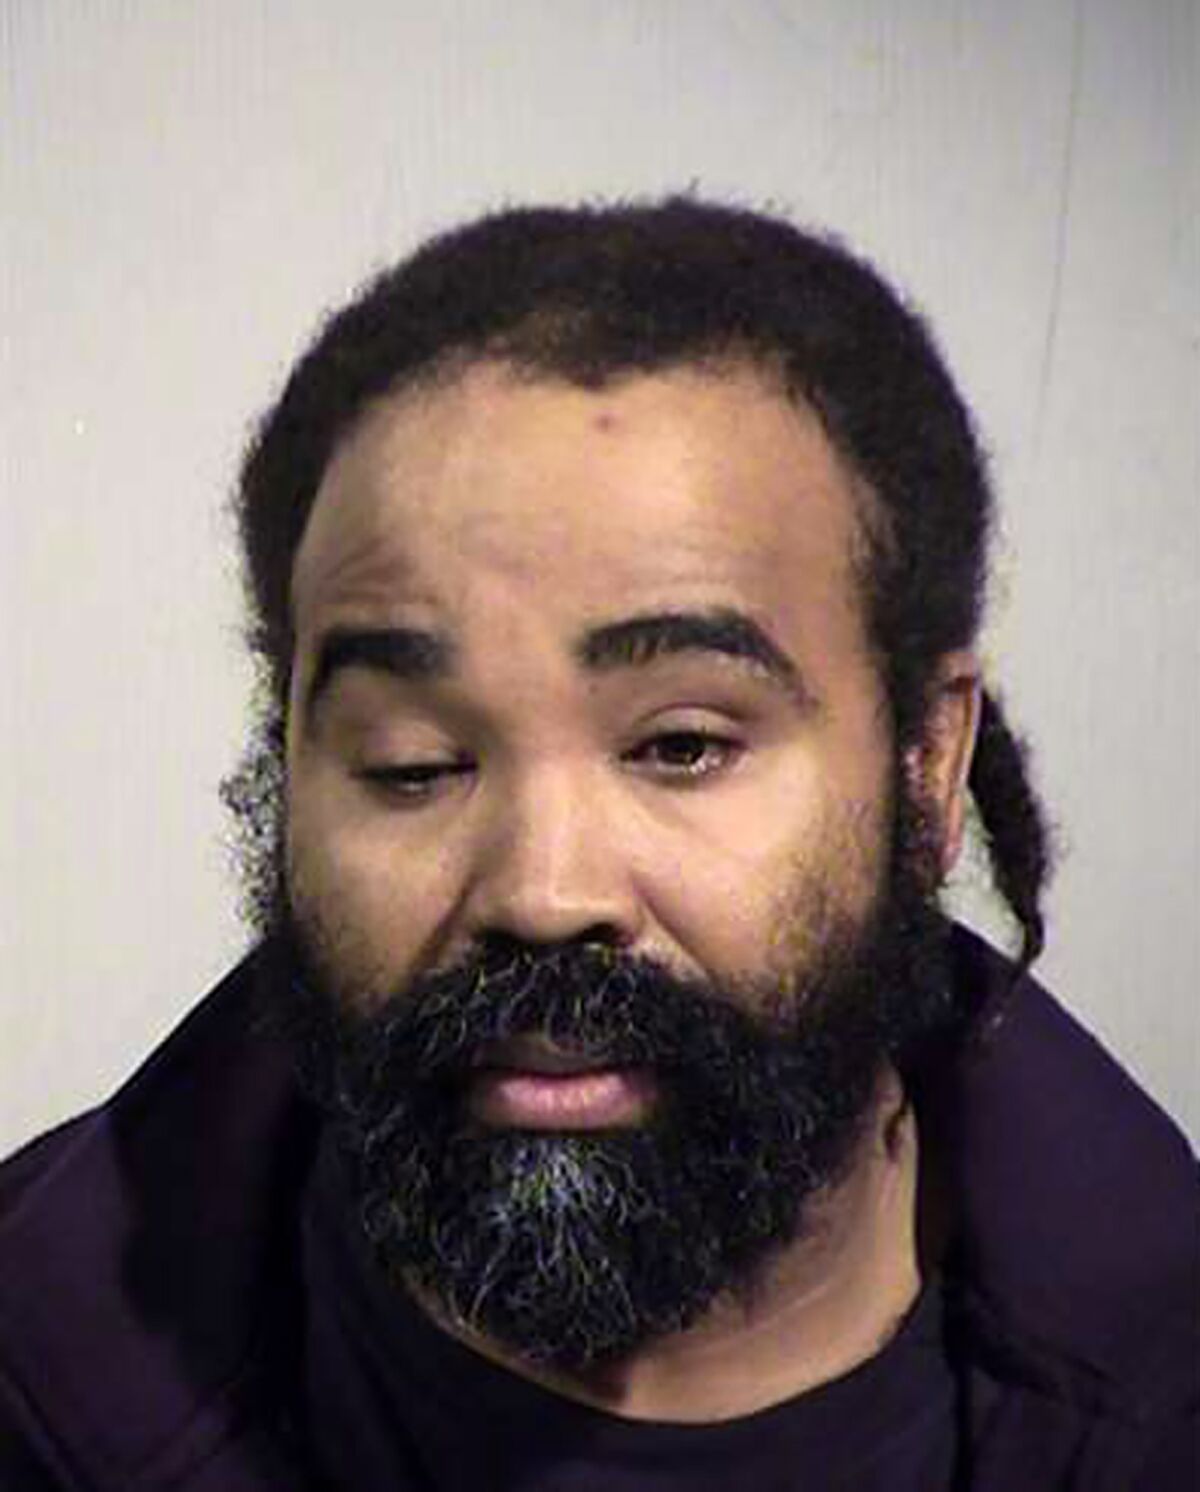 FILE - This undated photo provided by Maricopa County Sheriff's Office shows Nathan Sutherland, who was sentenced to 10 years in prison on Thursday, Dec. 2, 2021, for his conviction for sexually assaulting an incapacitated woman who later gave birth in 2018 at a long-term care facility in Phoenix. The pregnancy was discovered in December 2018 when an employee at the Hacienda Healthcare facility in Phoenix was changing the garments of the then-29-year-old victim and noticed the patient was in the process of delivering a child. (Maricopa County Sheriff's Office via AP, File)